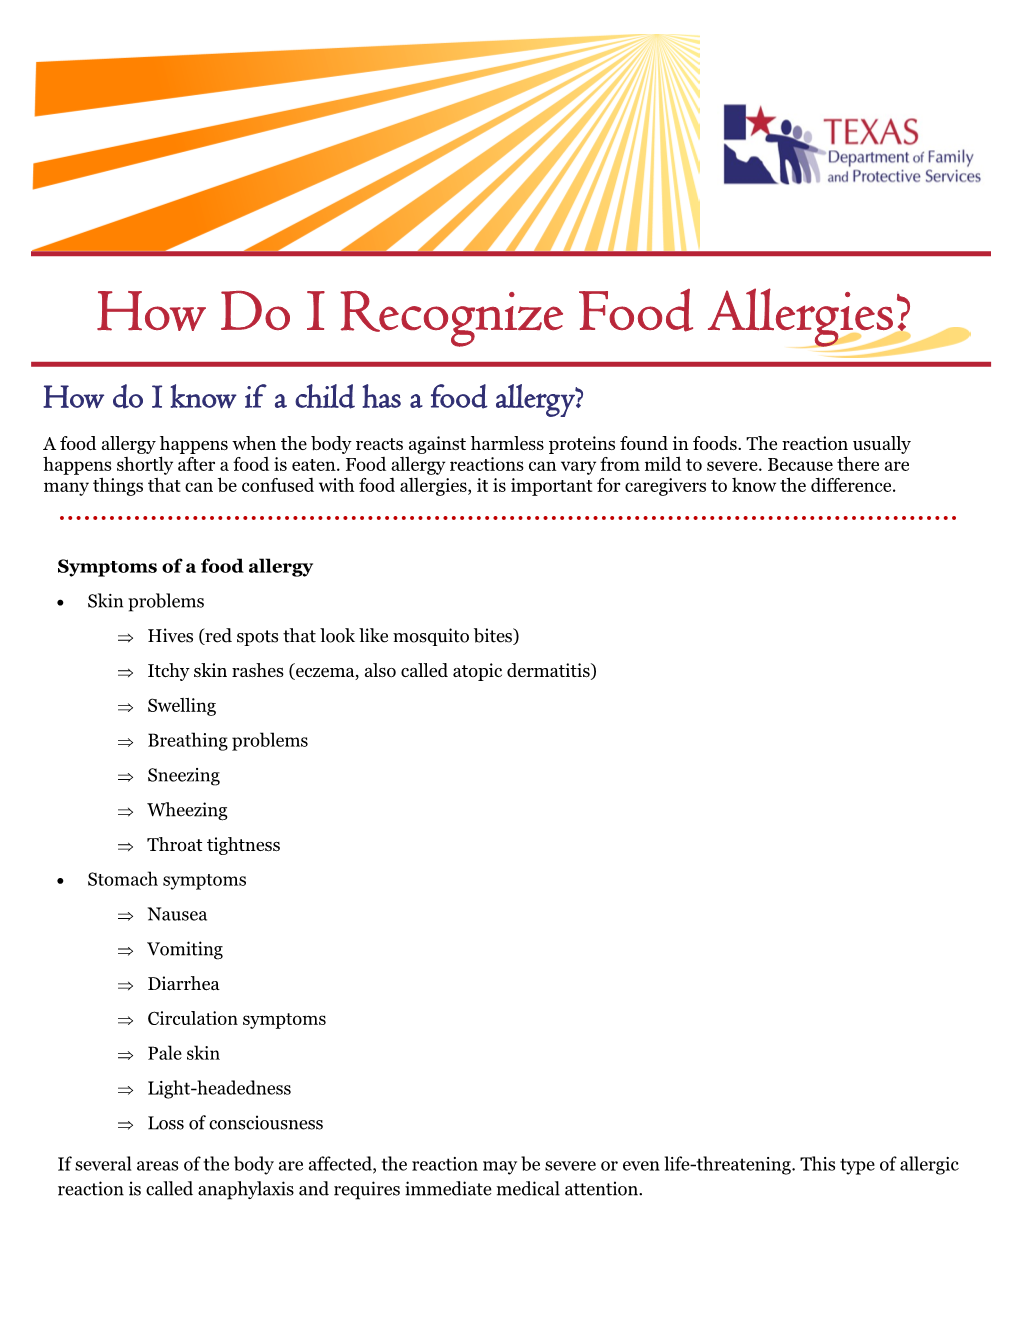 How Do I Recognize Food Allergies?